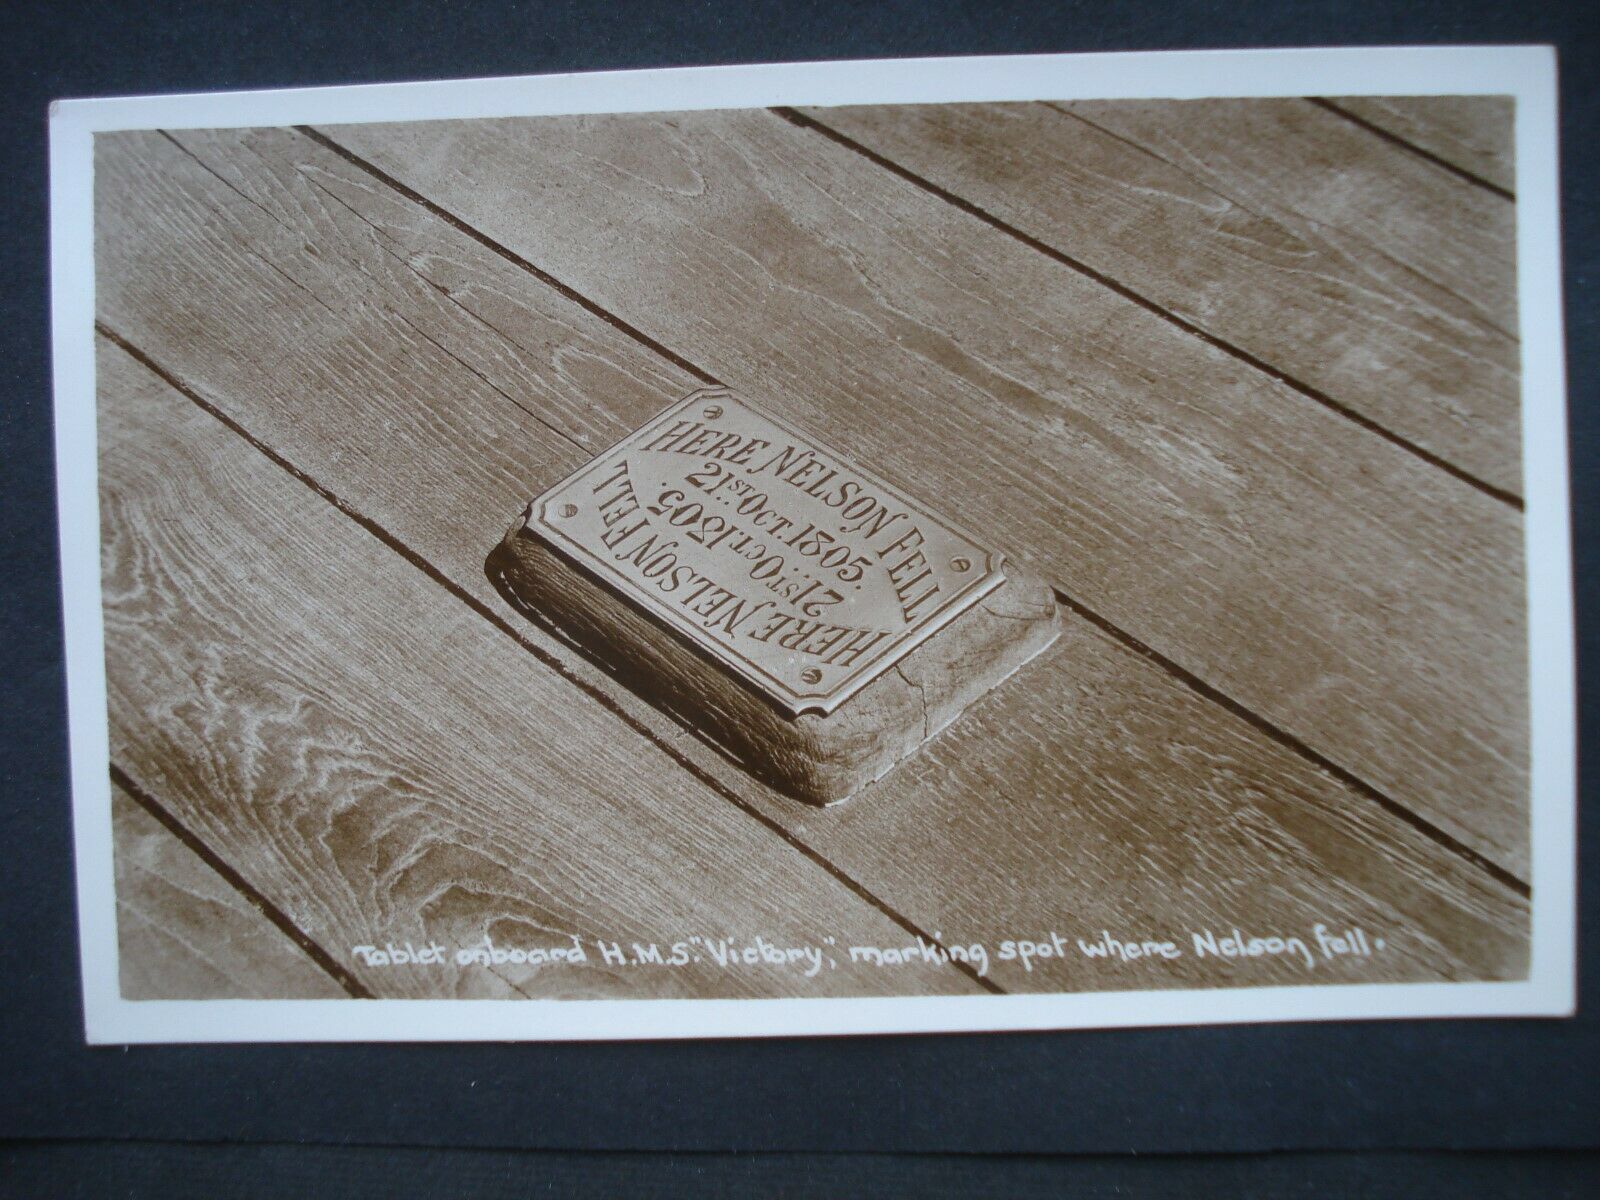 House Clearance - Unused Black & White Post Card On Board HMS Victory Tablet where Nelson fell